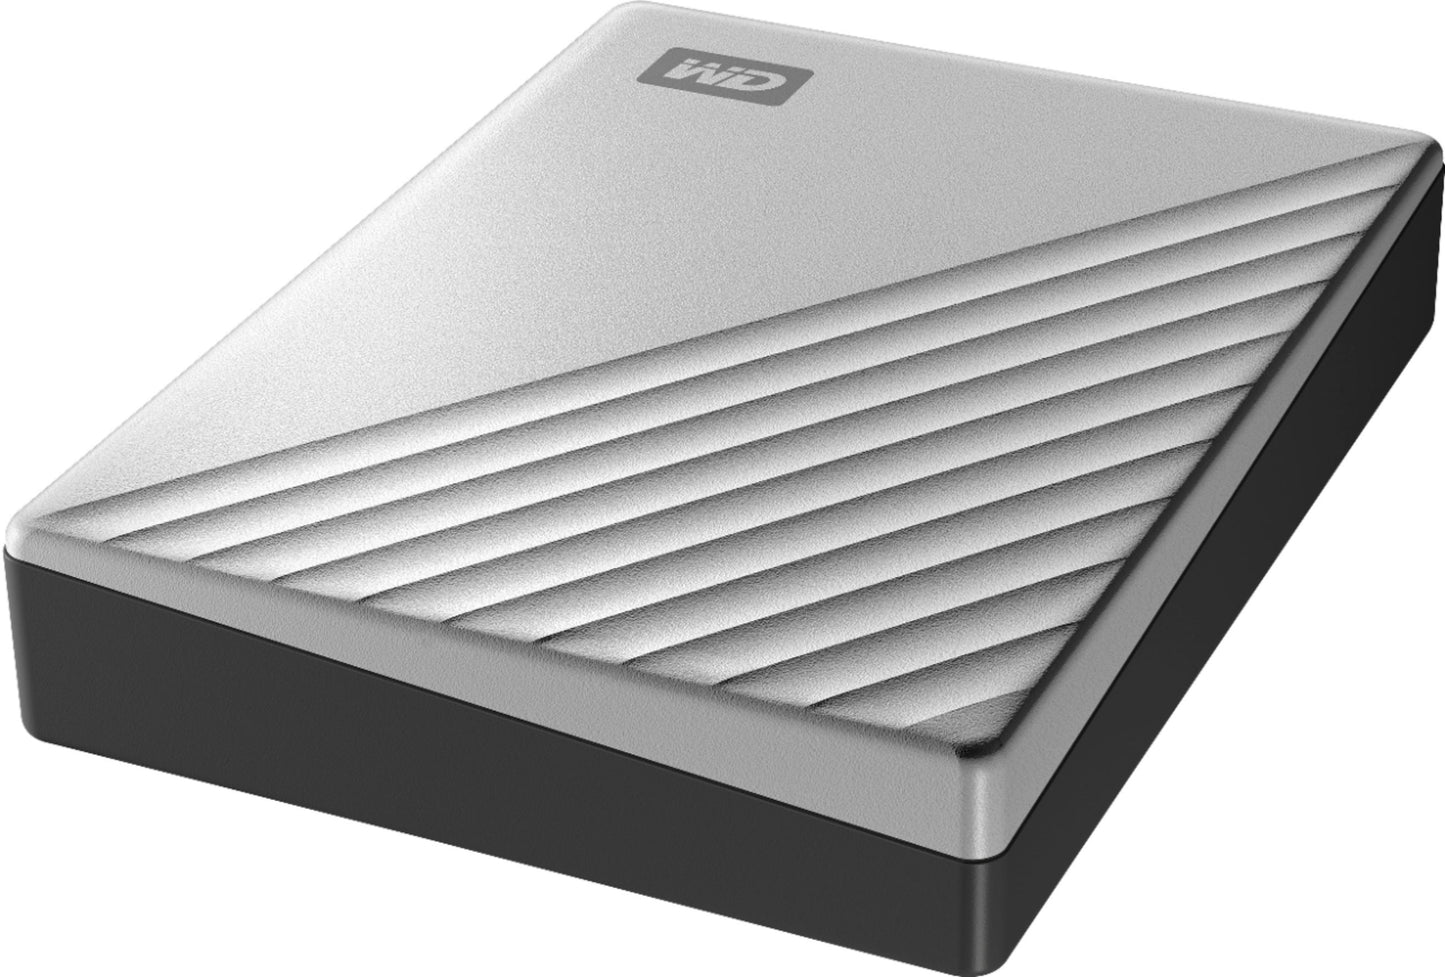 WD - My Passport Ultra 4TB External USB 3.0 Portable Hard Drive with Silver